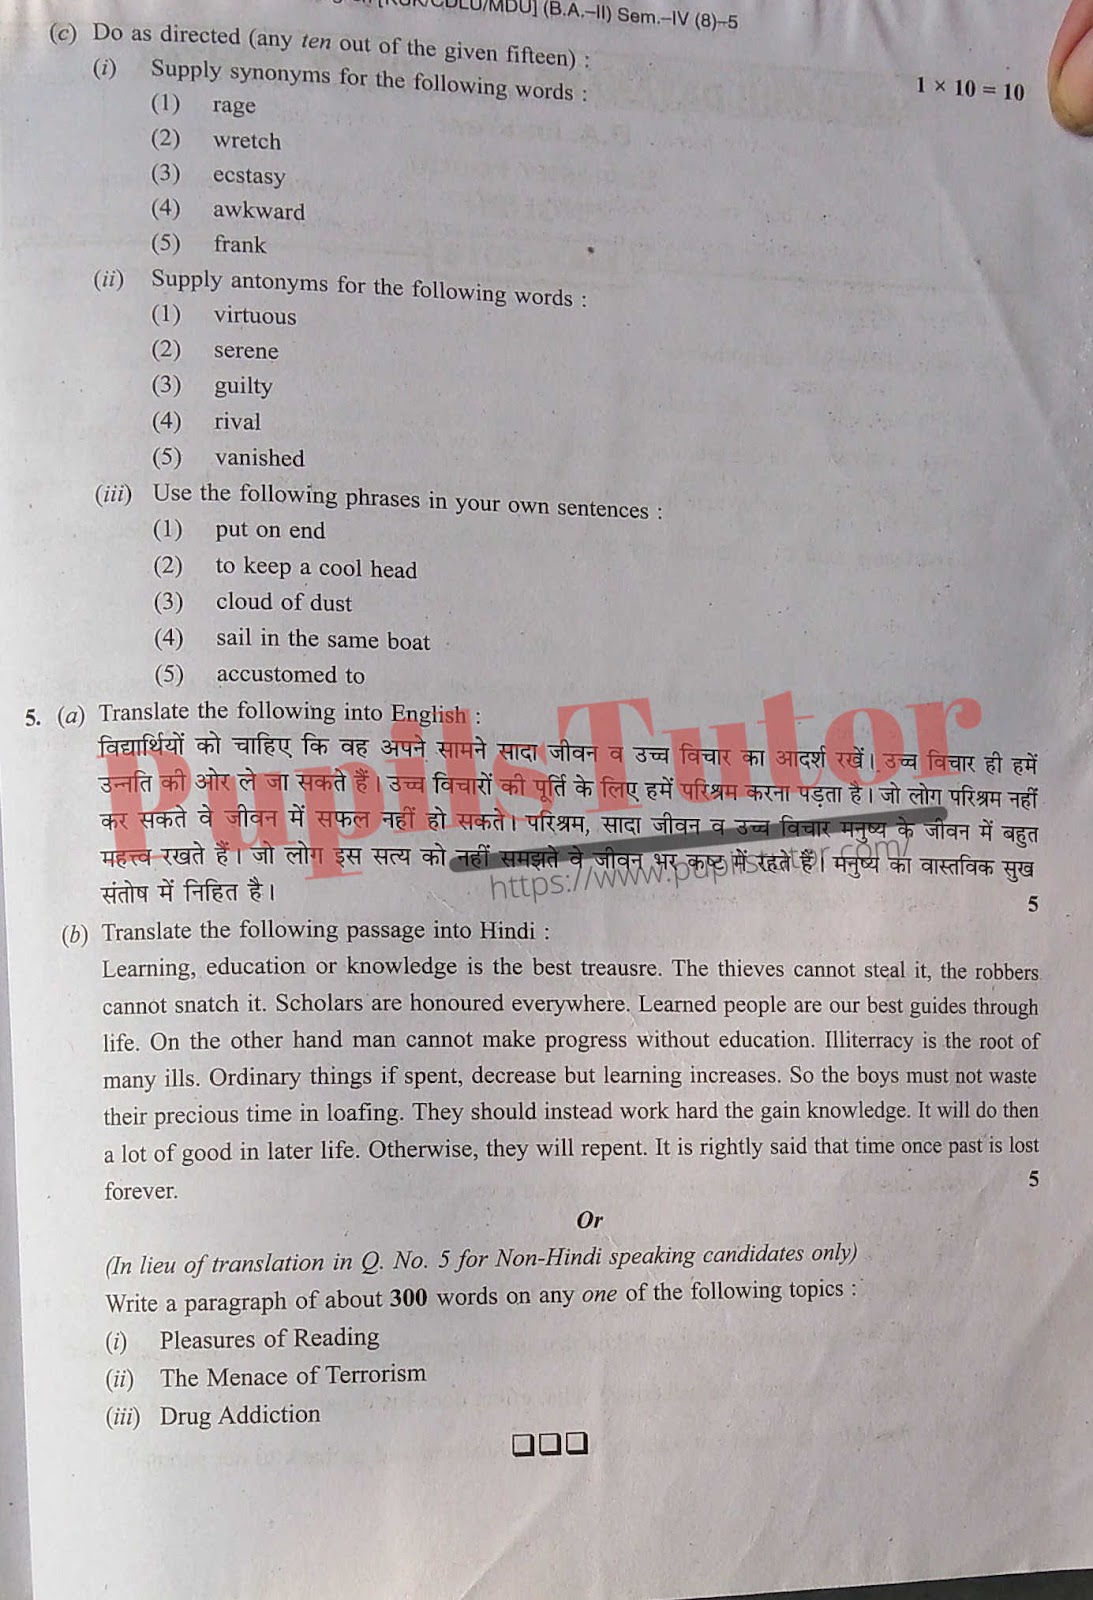 Free Download PDF Of Chaudhary Devi Lal University, Sirsa (CDLU) B.A. Fourth Semester Latest Question Paper For English Subject (Page 3) - https://www.pupilstutor.com